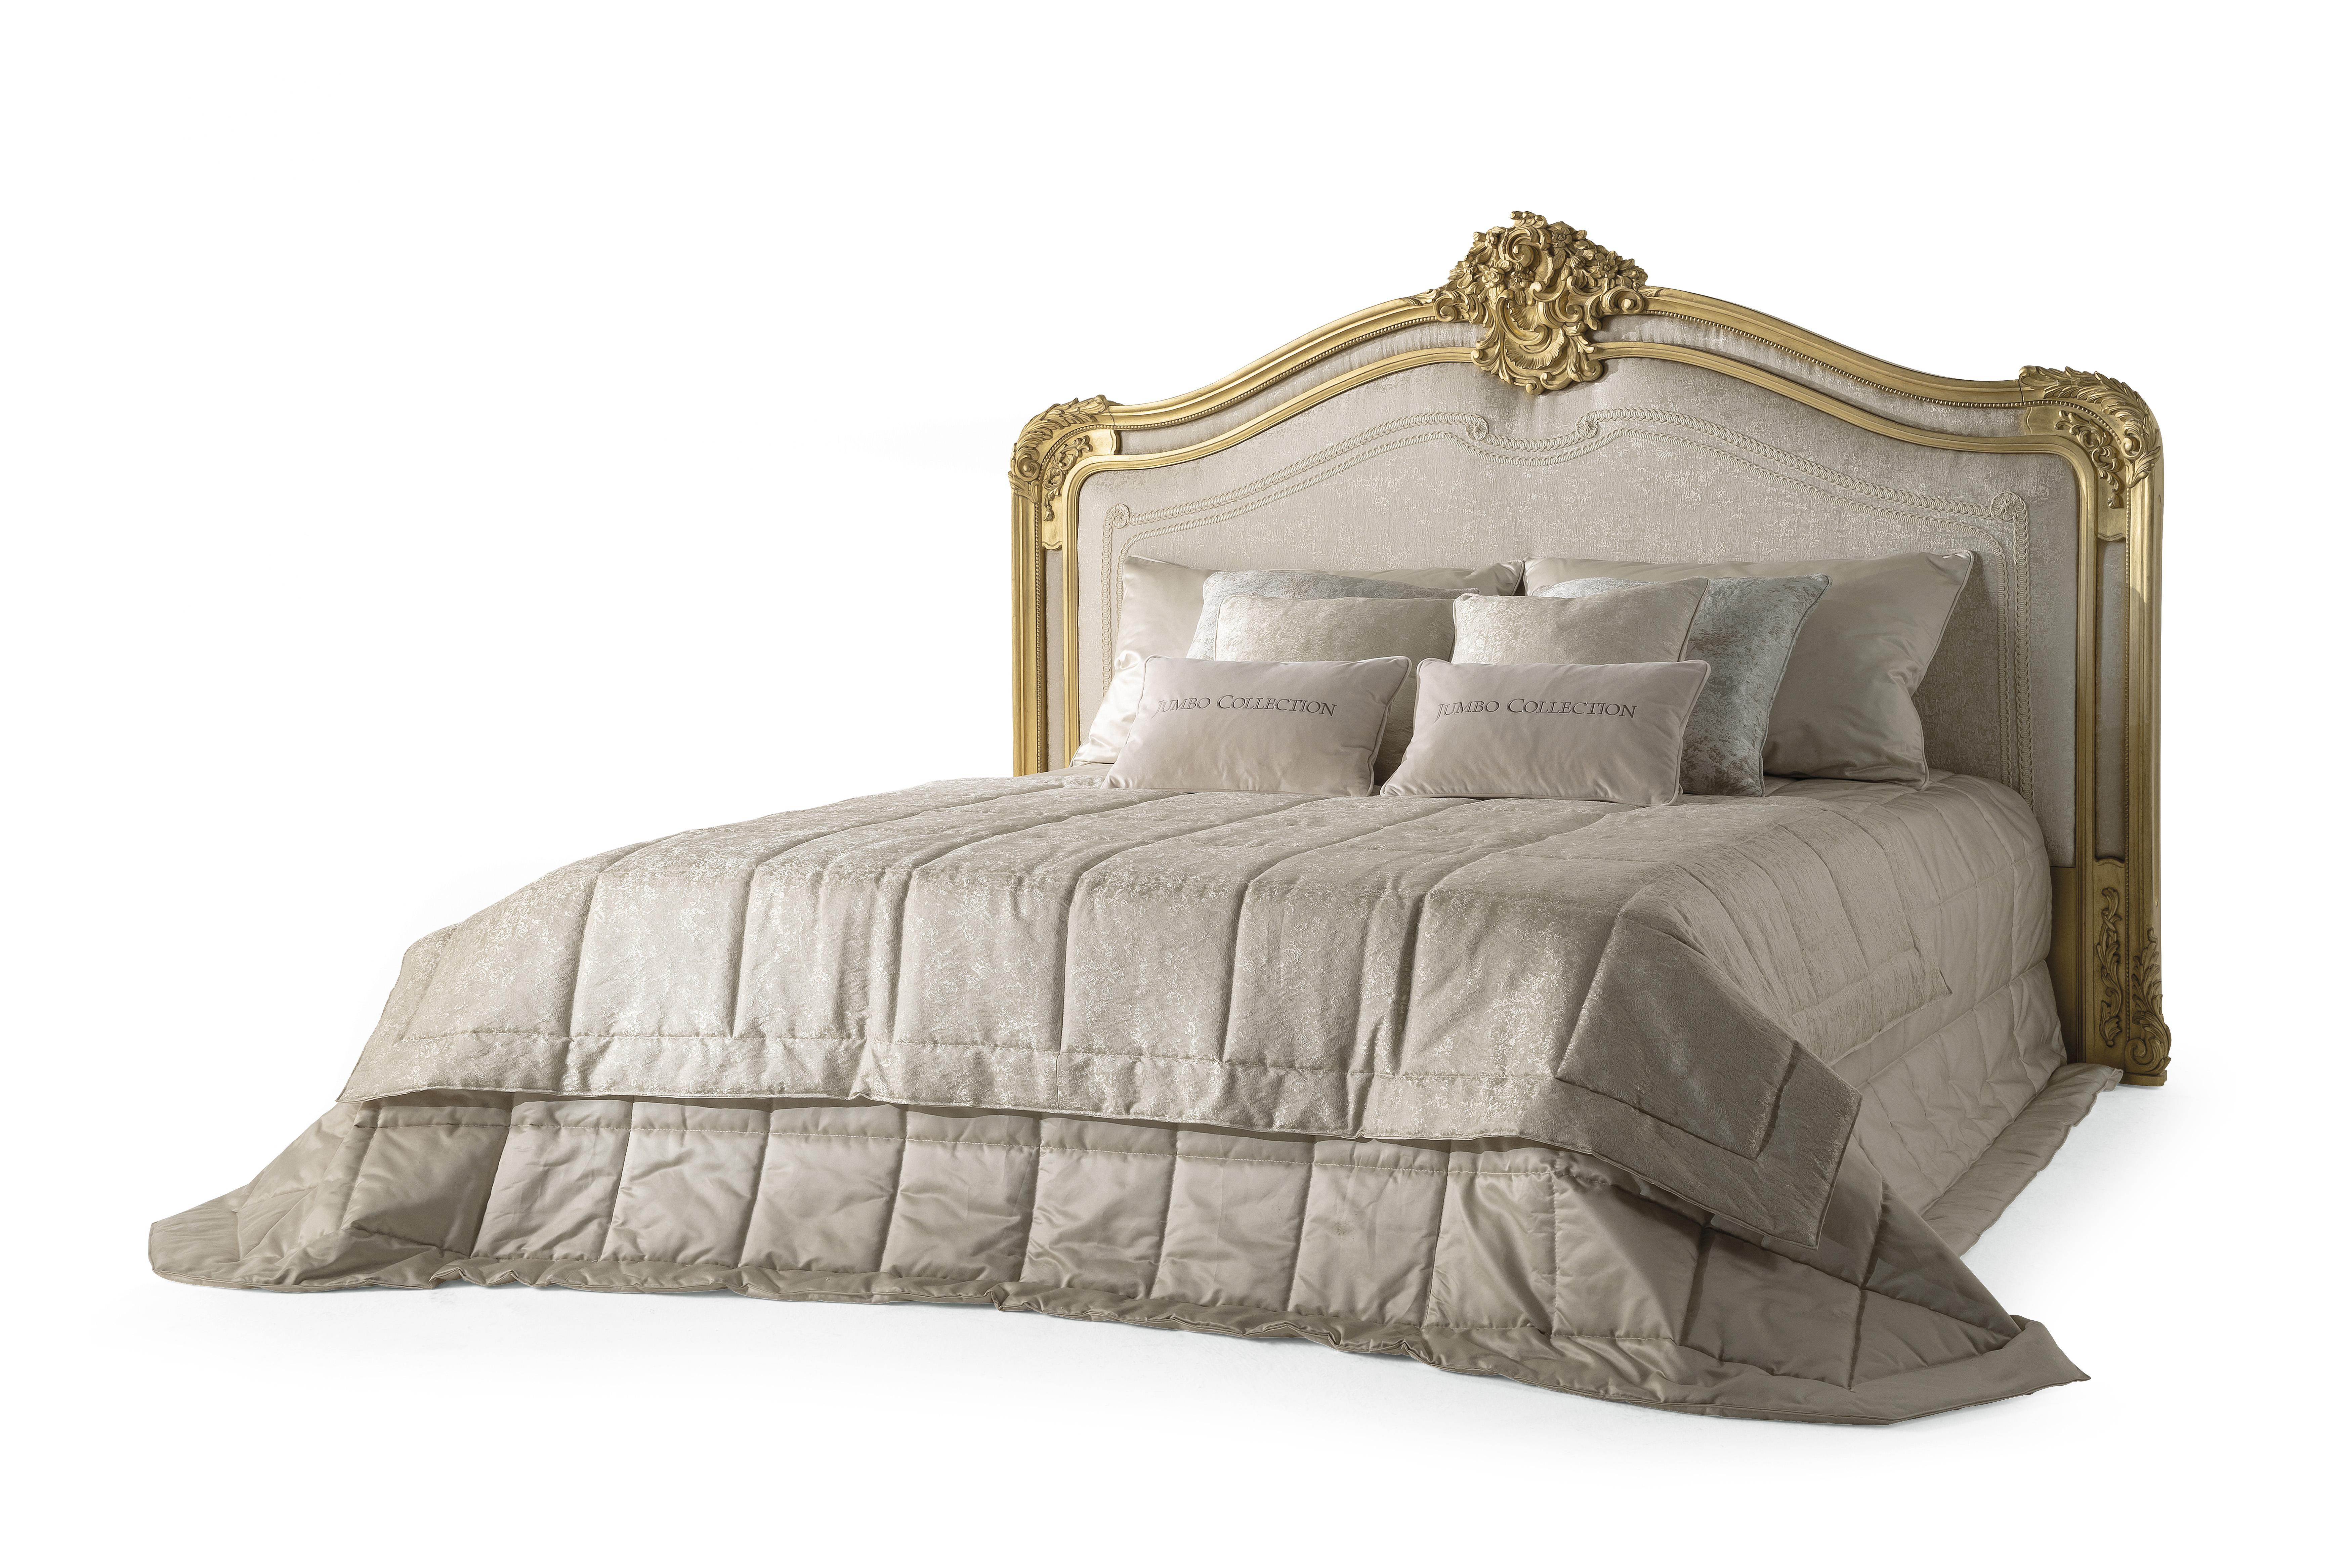 Chaine is a classic French-style bed that perfectly expresses the heritage of Jumbo Collection brand, in which attention to detail, craftsmanship and precious materials prevail. The sumptuous headboard in hand-carved beechwood with a patinated